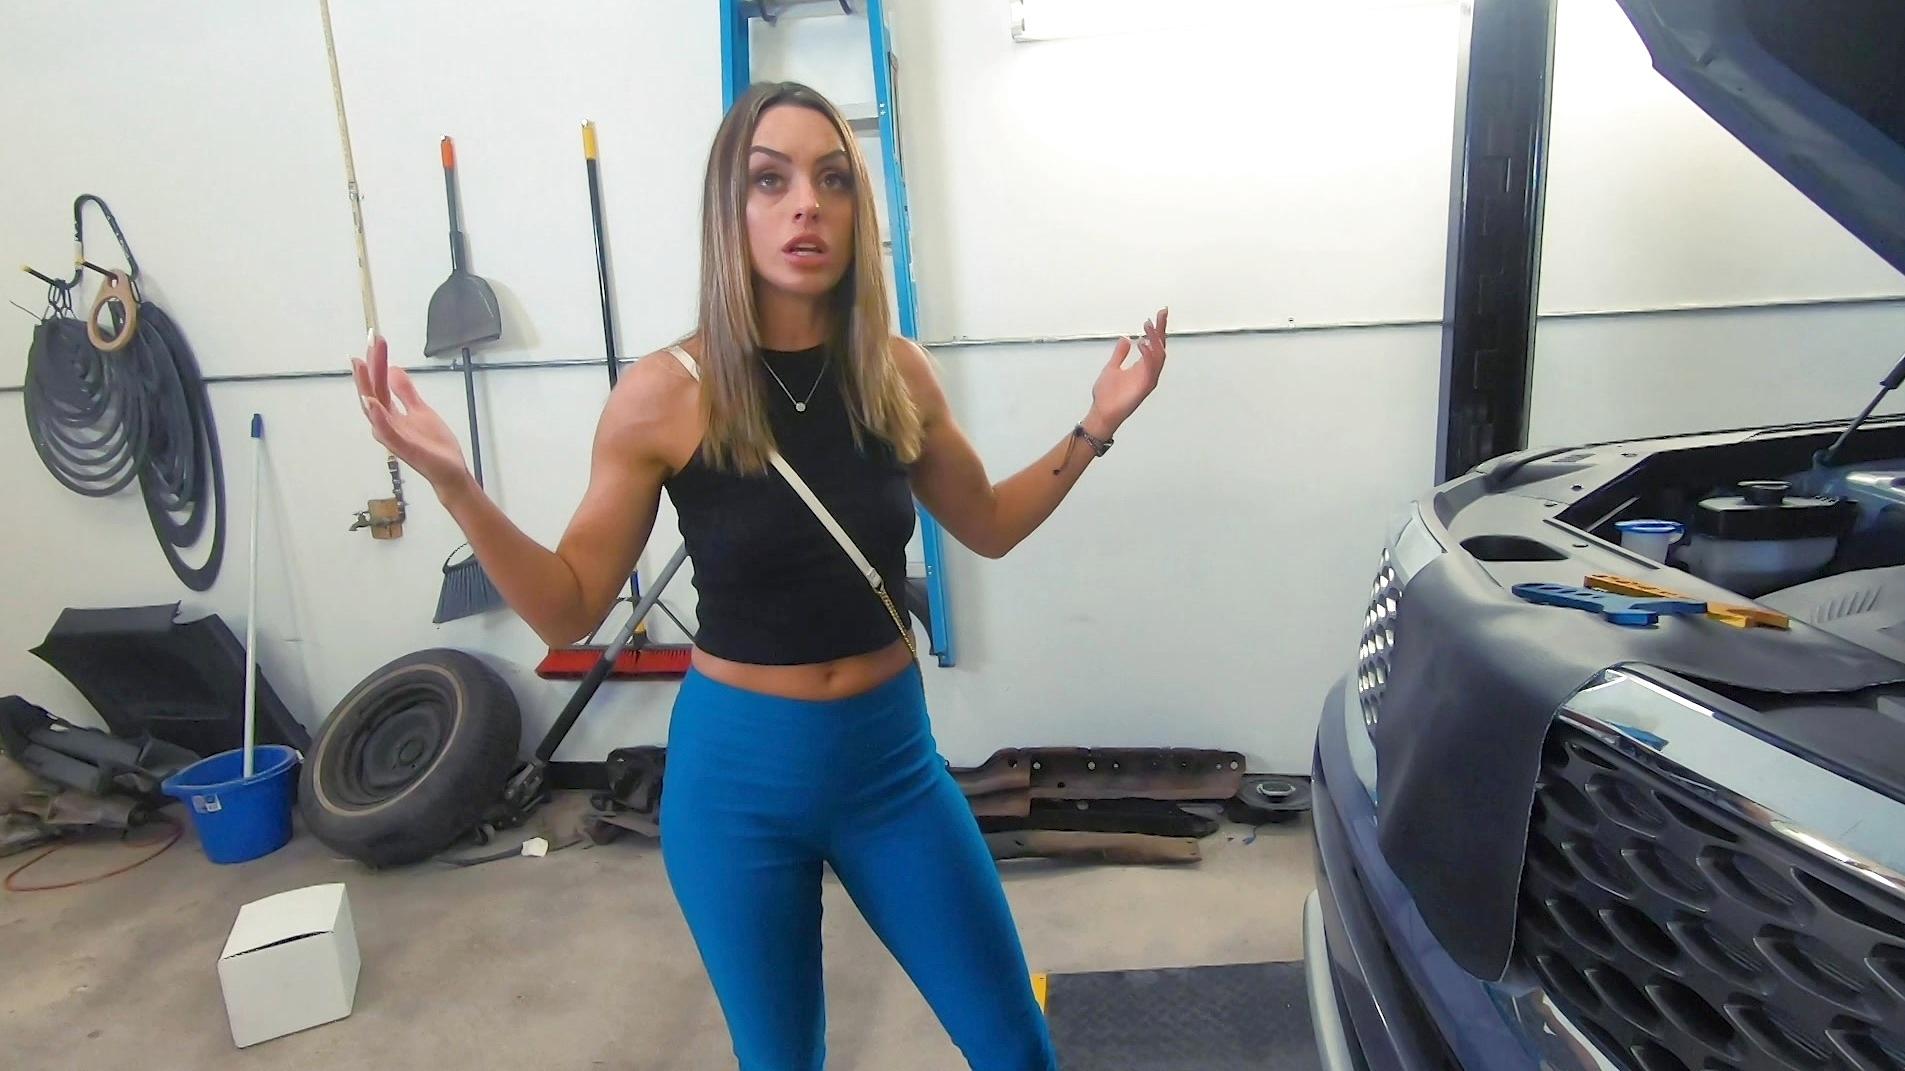 Jaimie Vine Cheats On Her Husband To Get Her Car Back